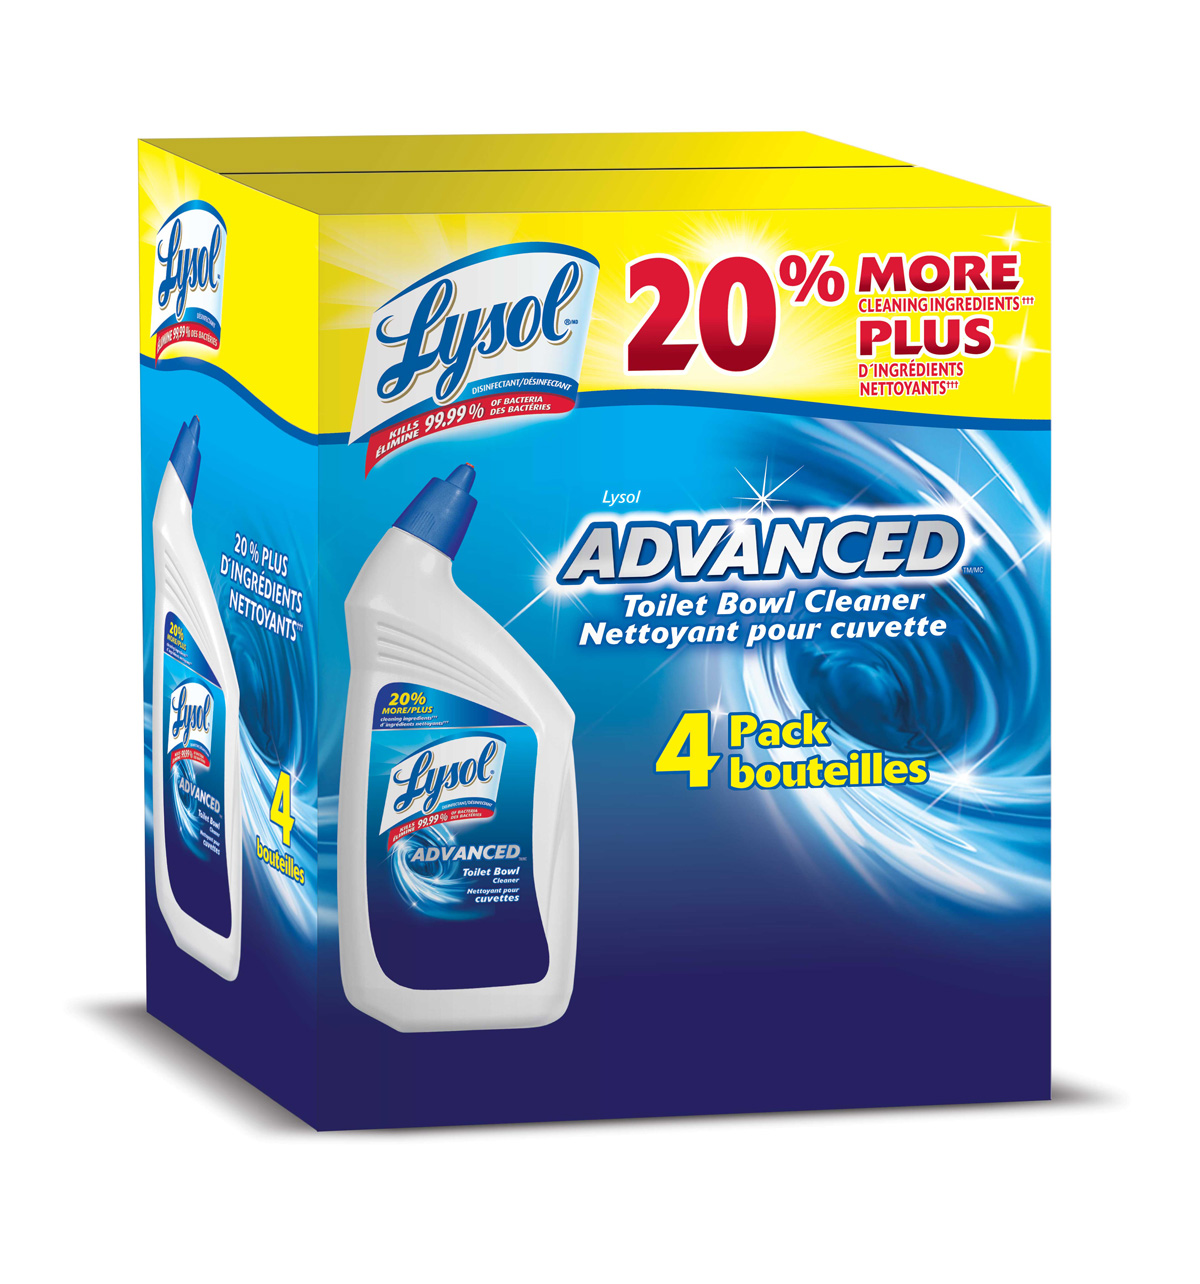 LYSOL Disinfectant Advanced Toilet Bowl Cleaner Canada Discontinued June 1 2021